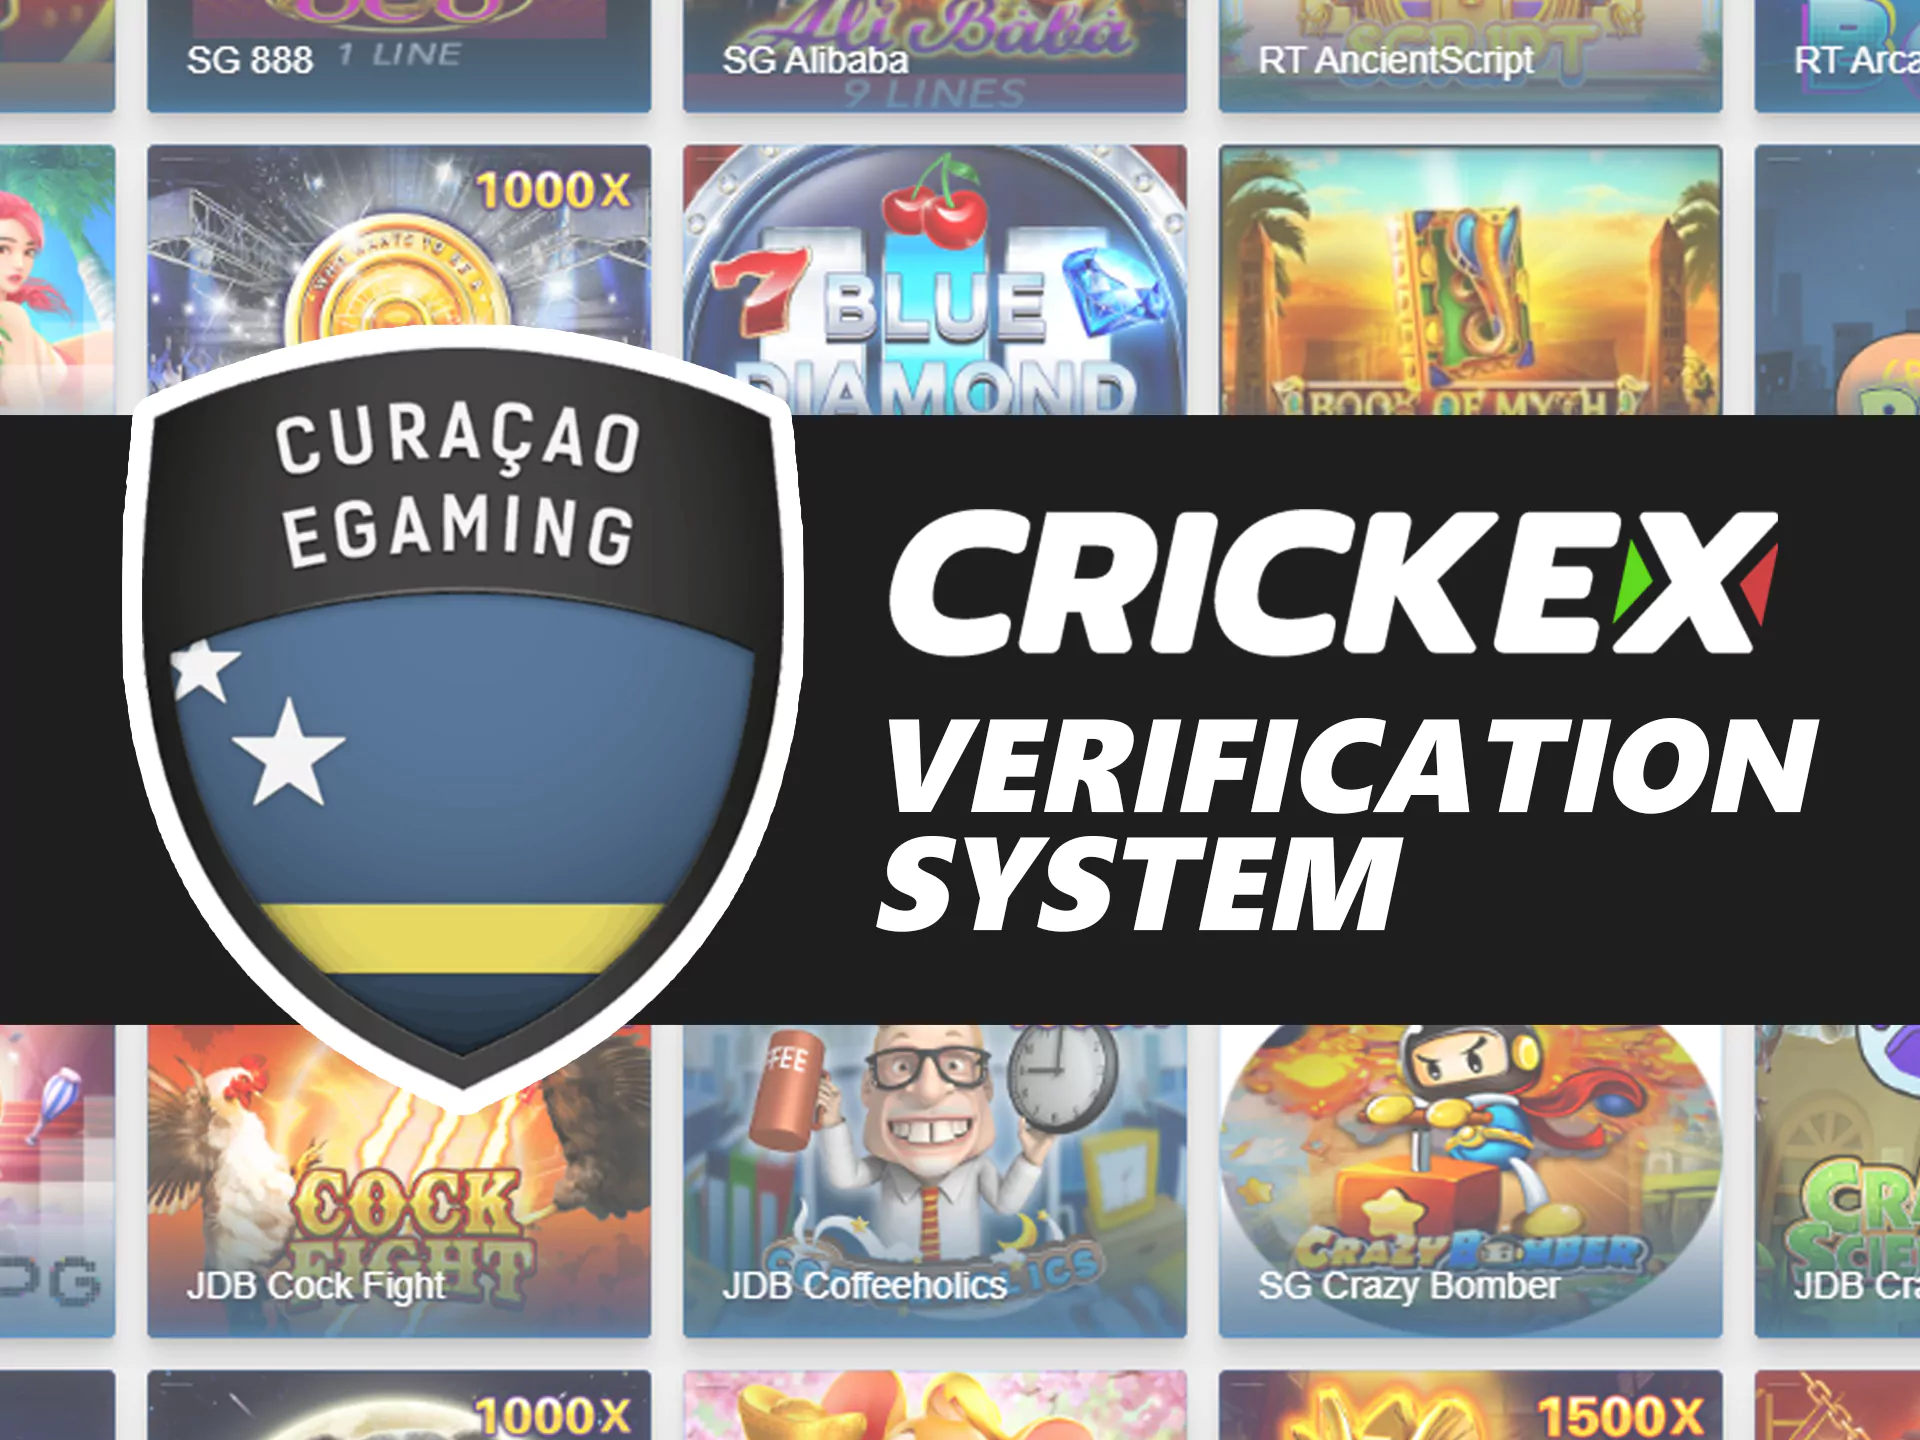 Play licensed games at Crickex.